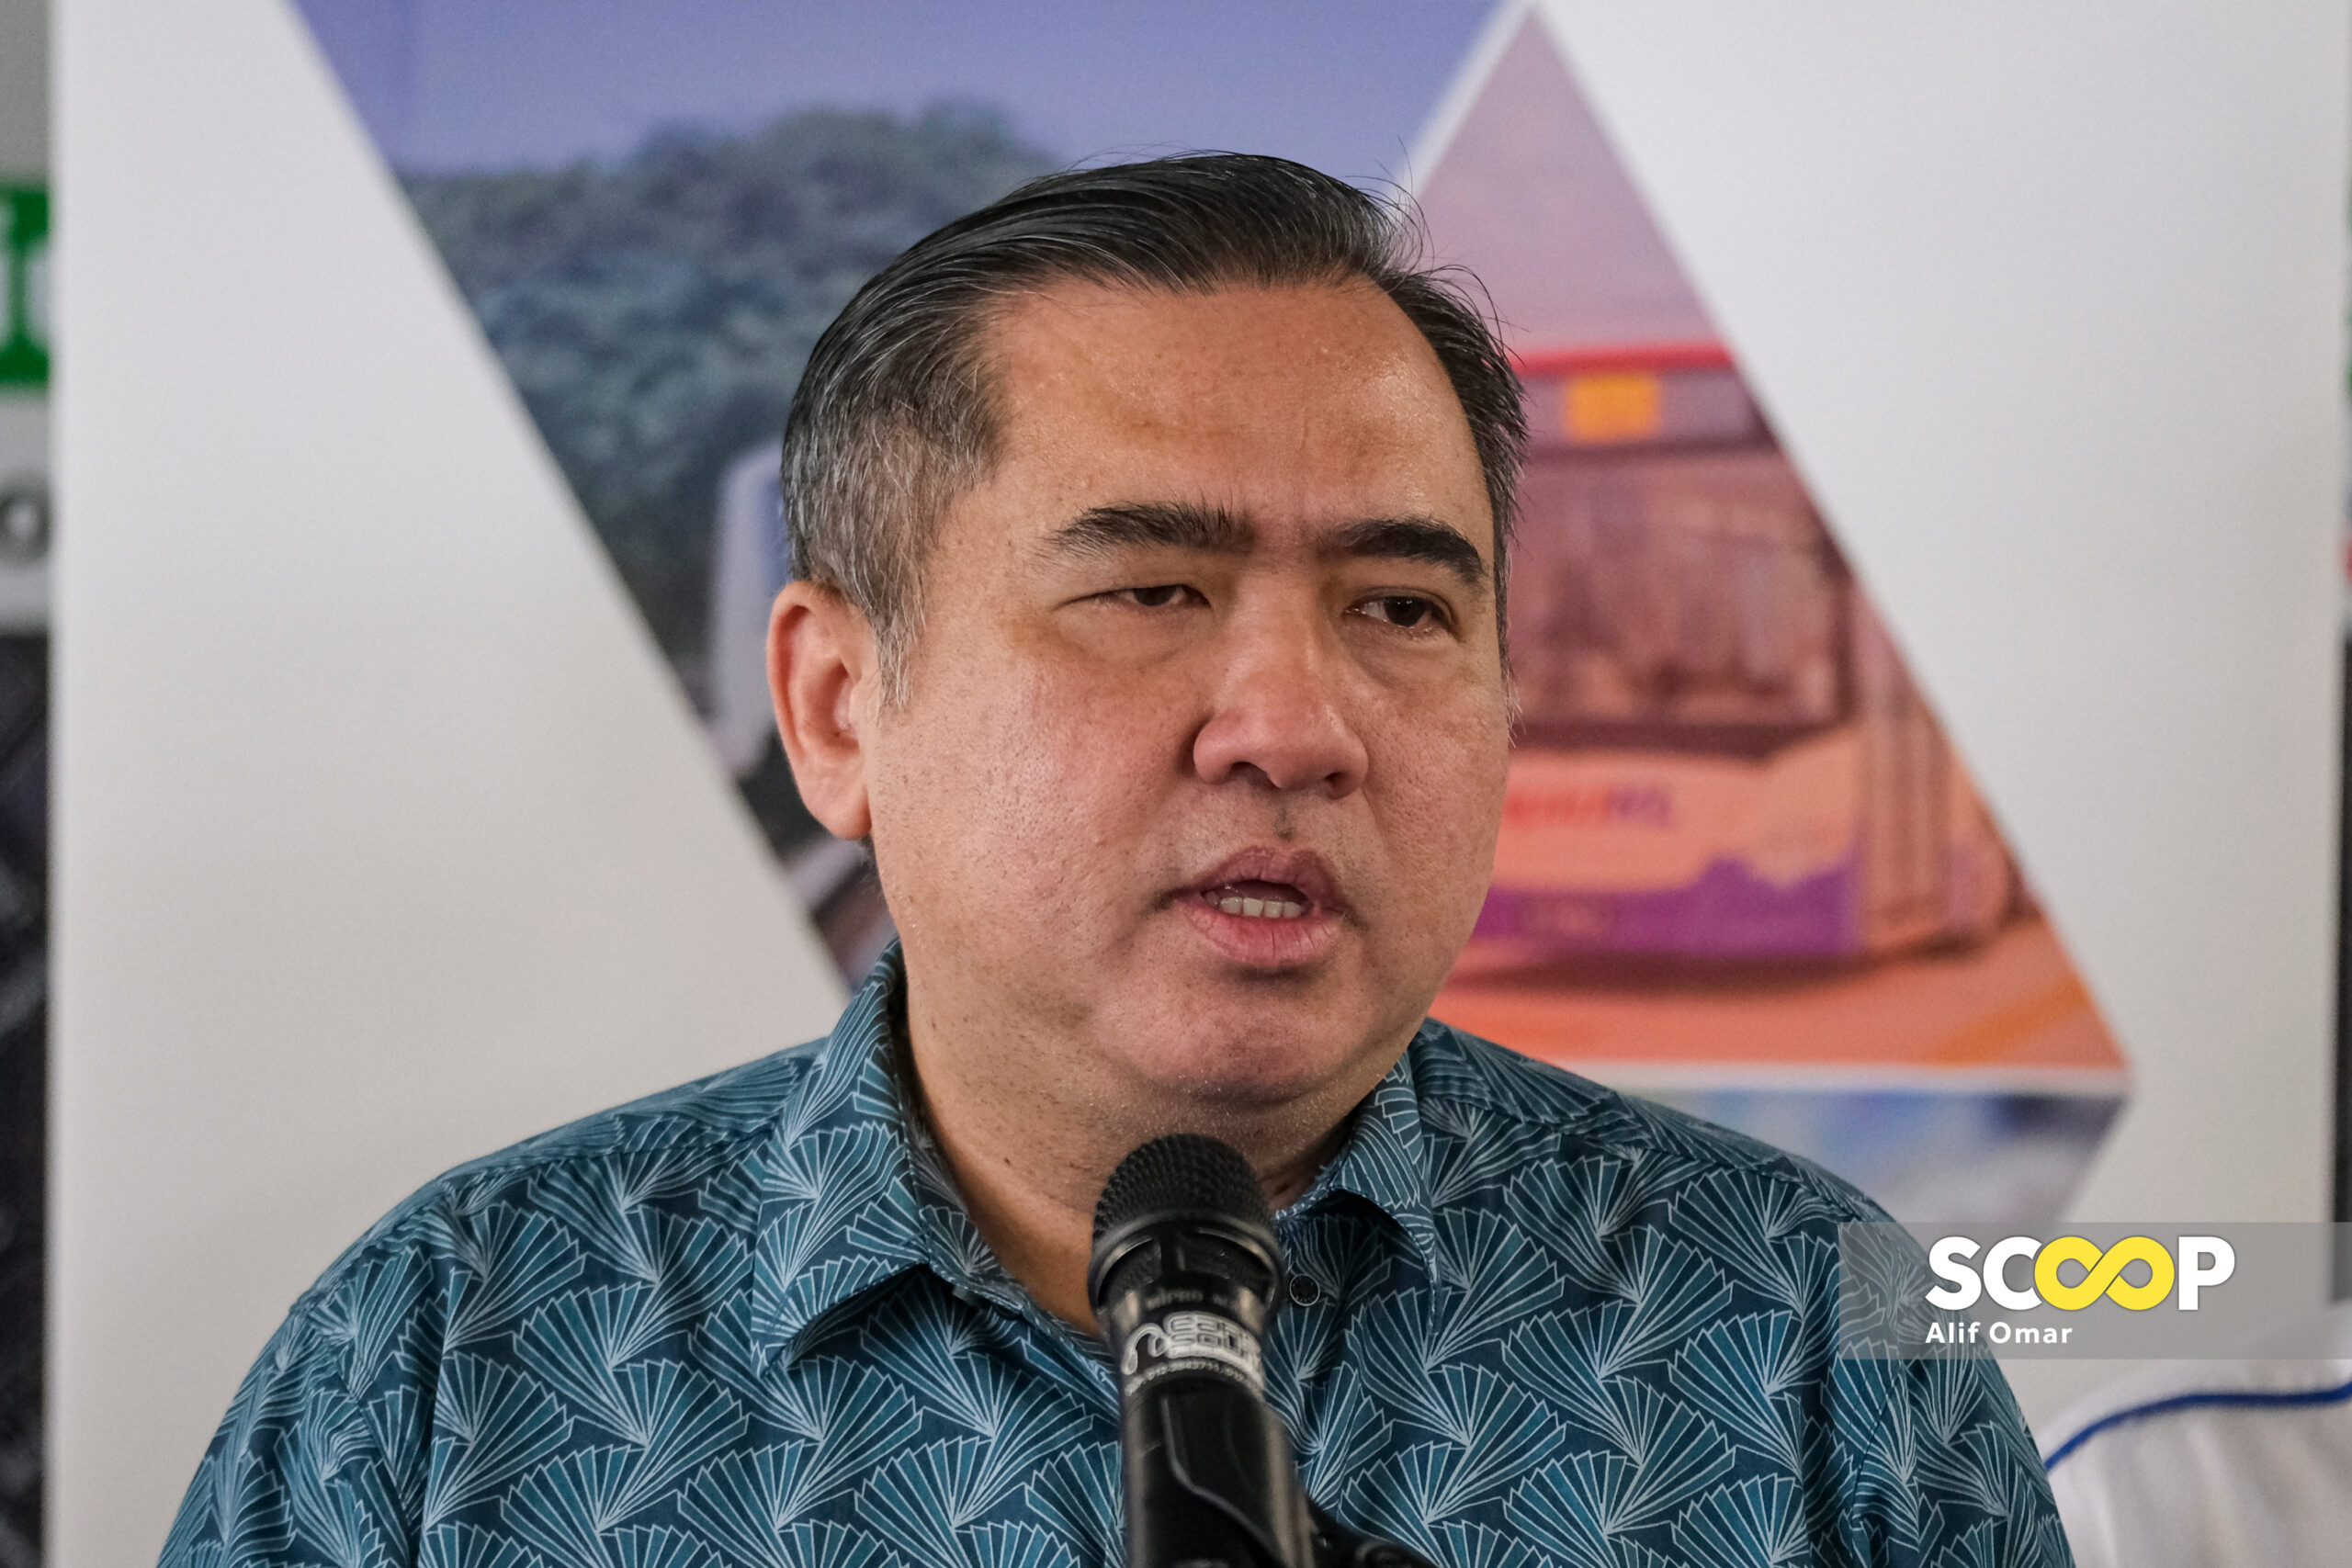 Ship that docked in Malaysia no longer owned by Israel’s ZIM, clarifies Loke